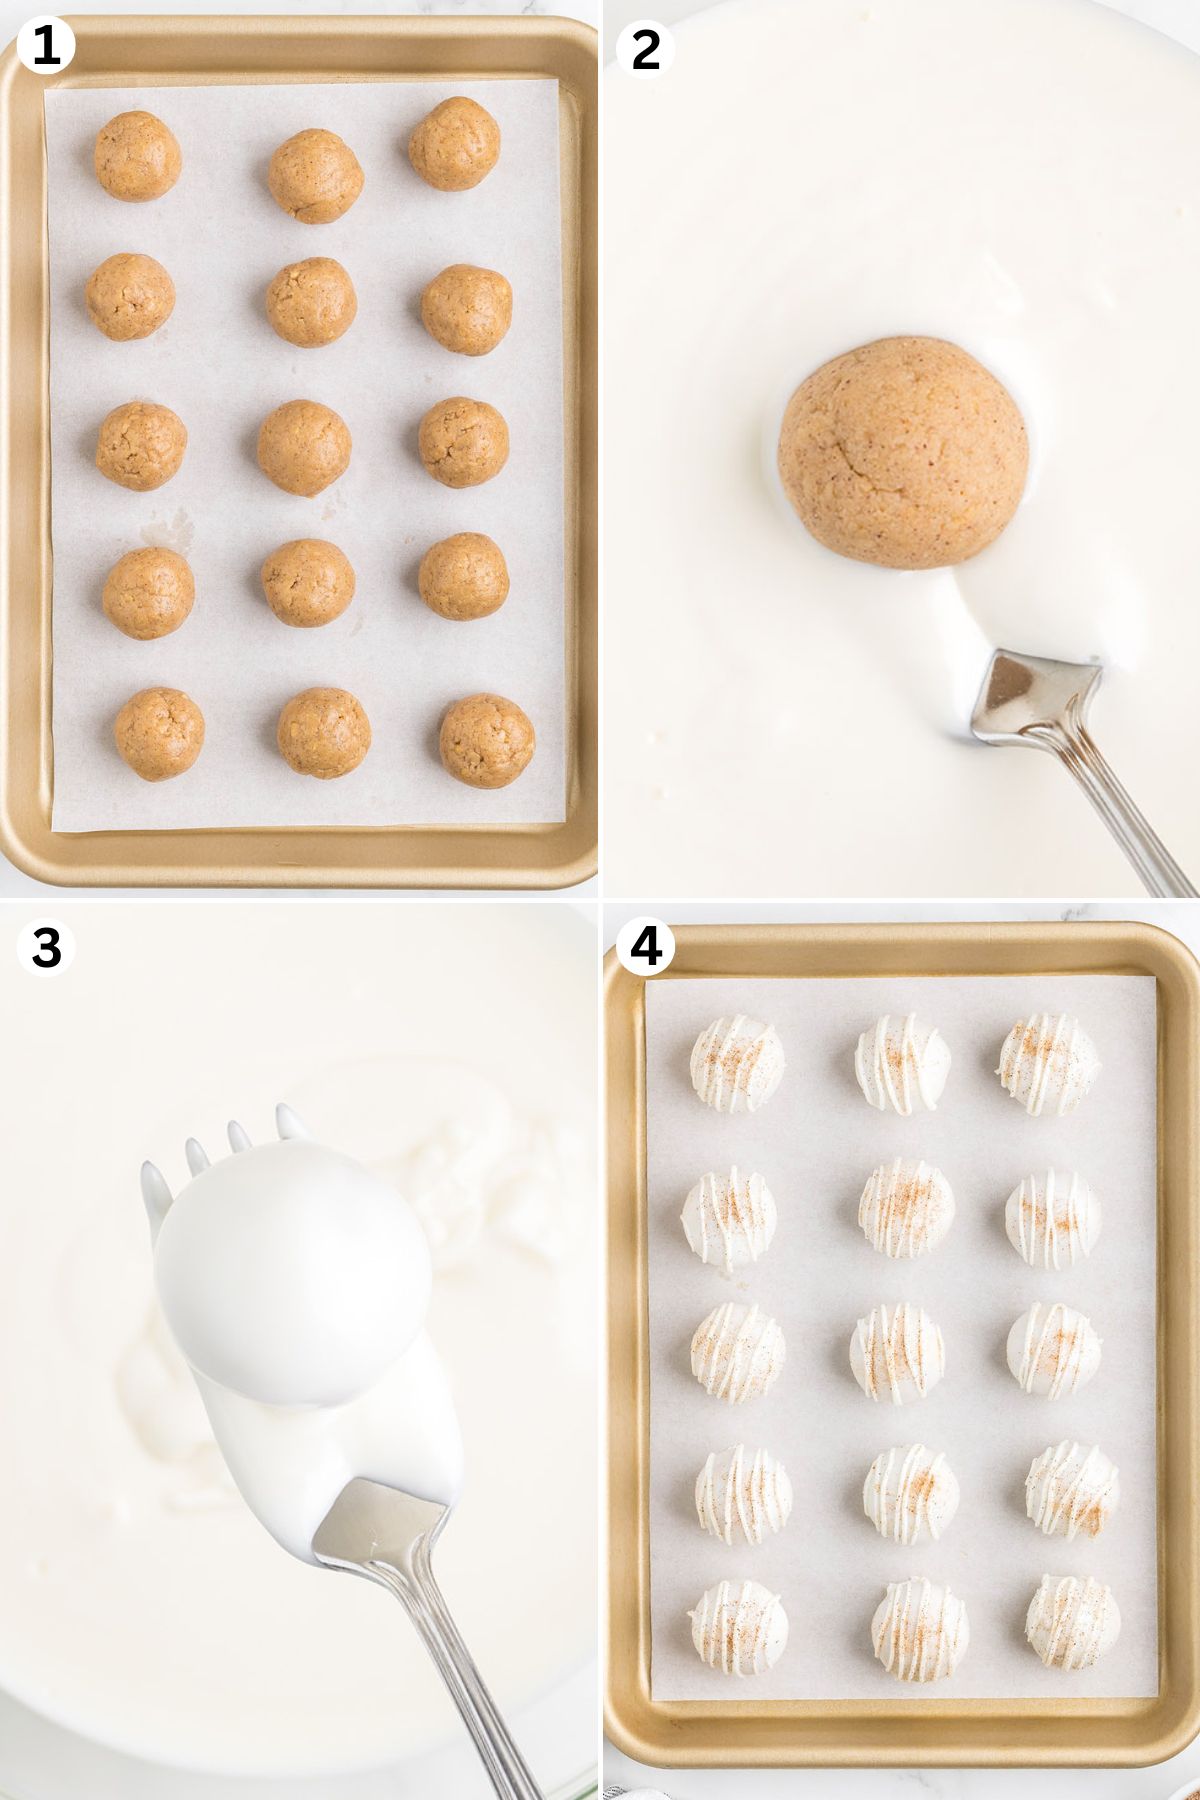 snickerdoodle truffles rolled into balls. cover the balls with melted white chocolate. line the truffles in baking tray.